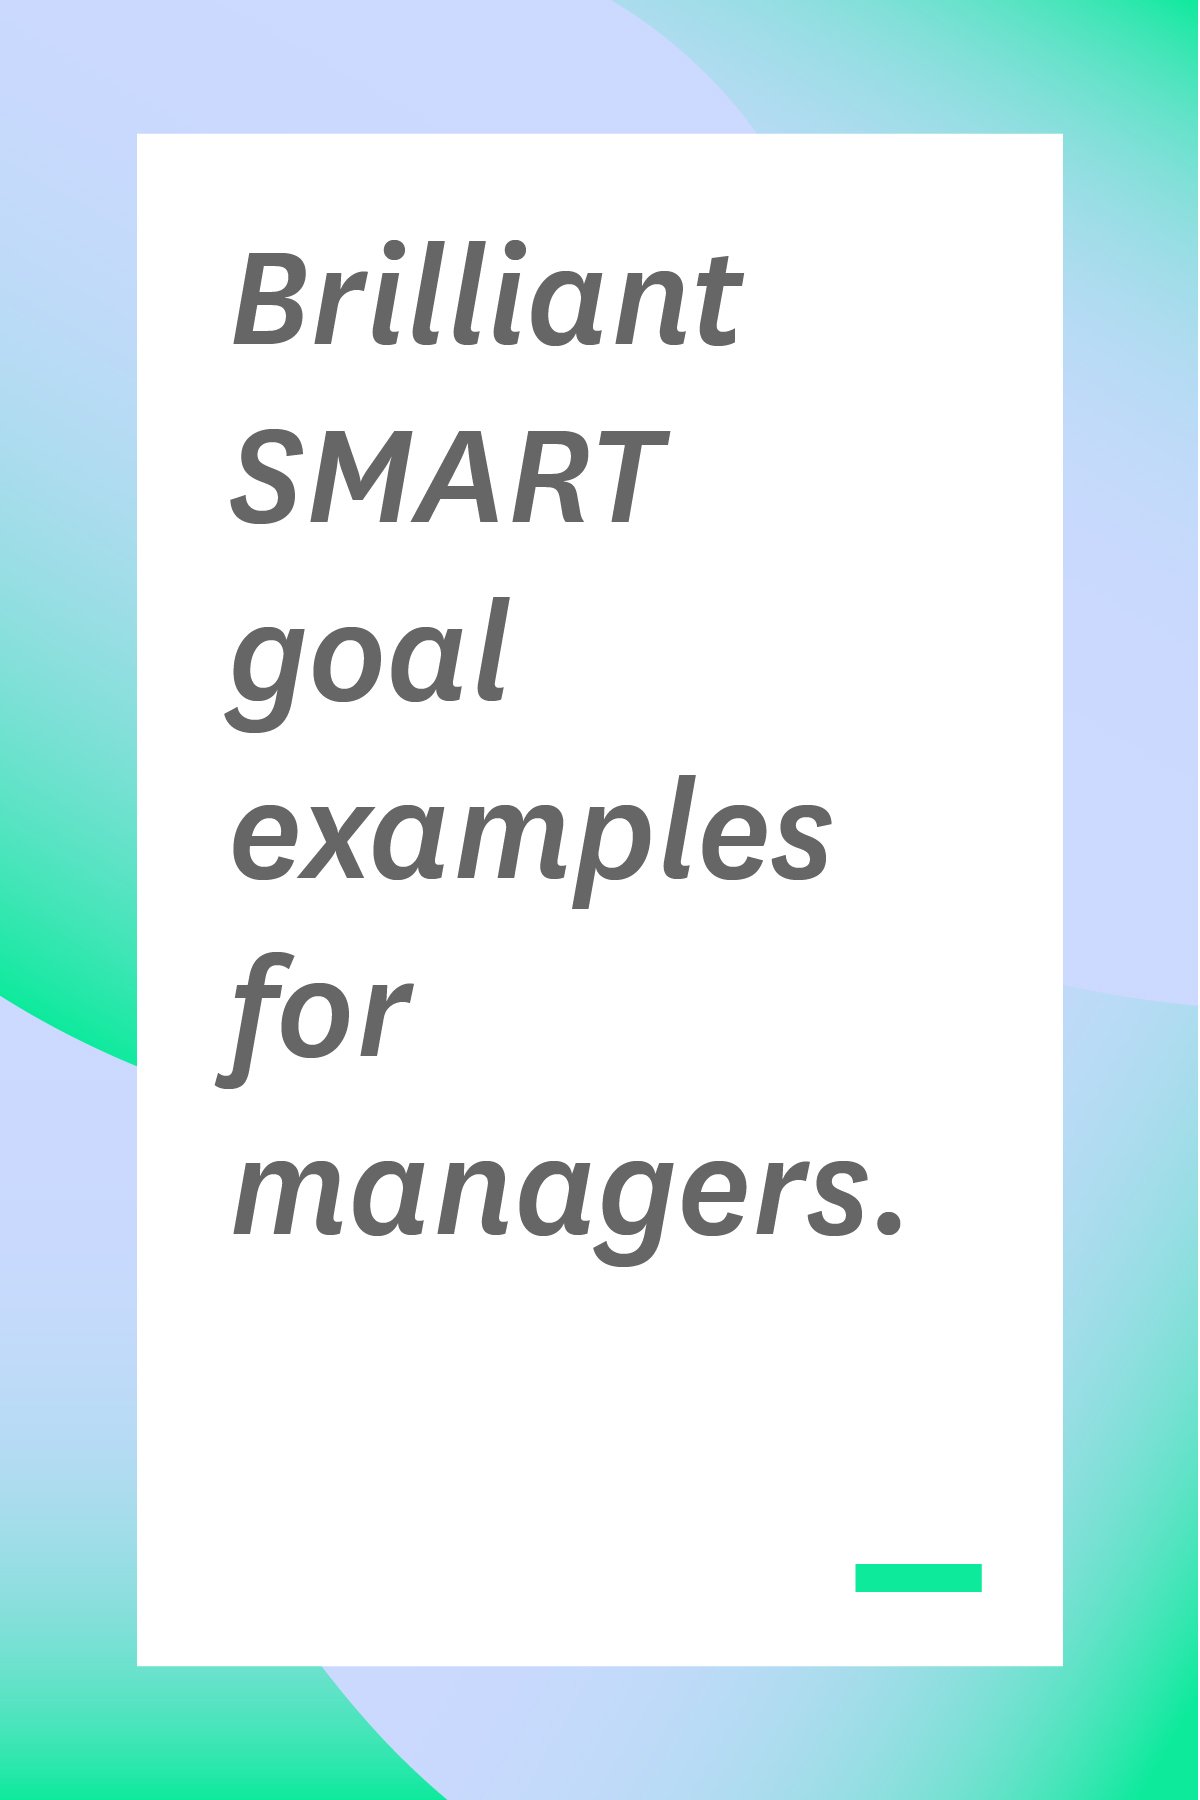 Does your team need SMART goals? These SMART goal examples will help you write your own goals more effectively, so your team can be more effective too. #smartgoals #goalsetting